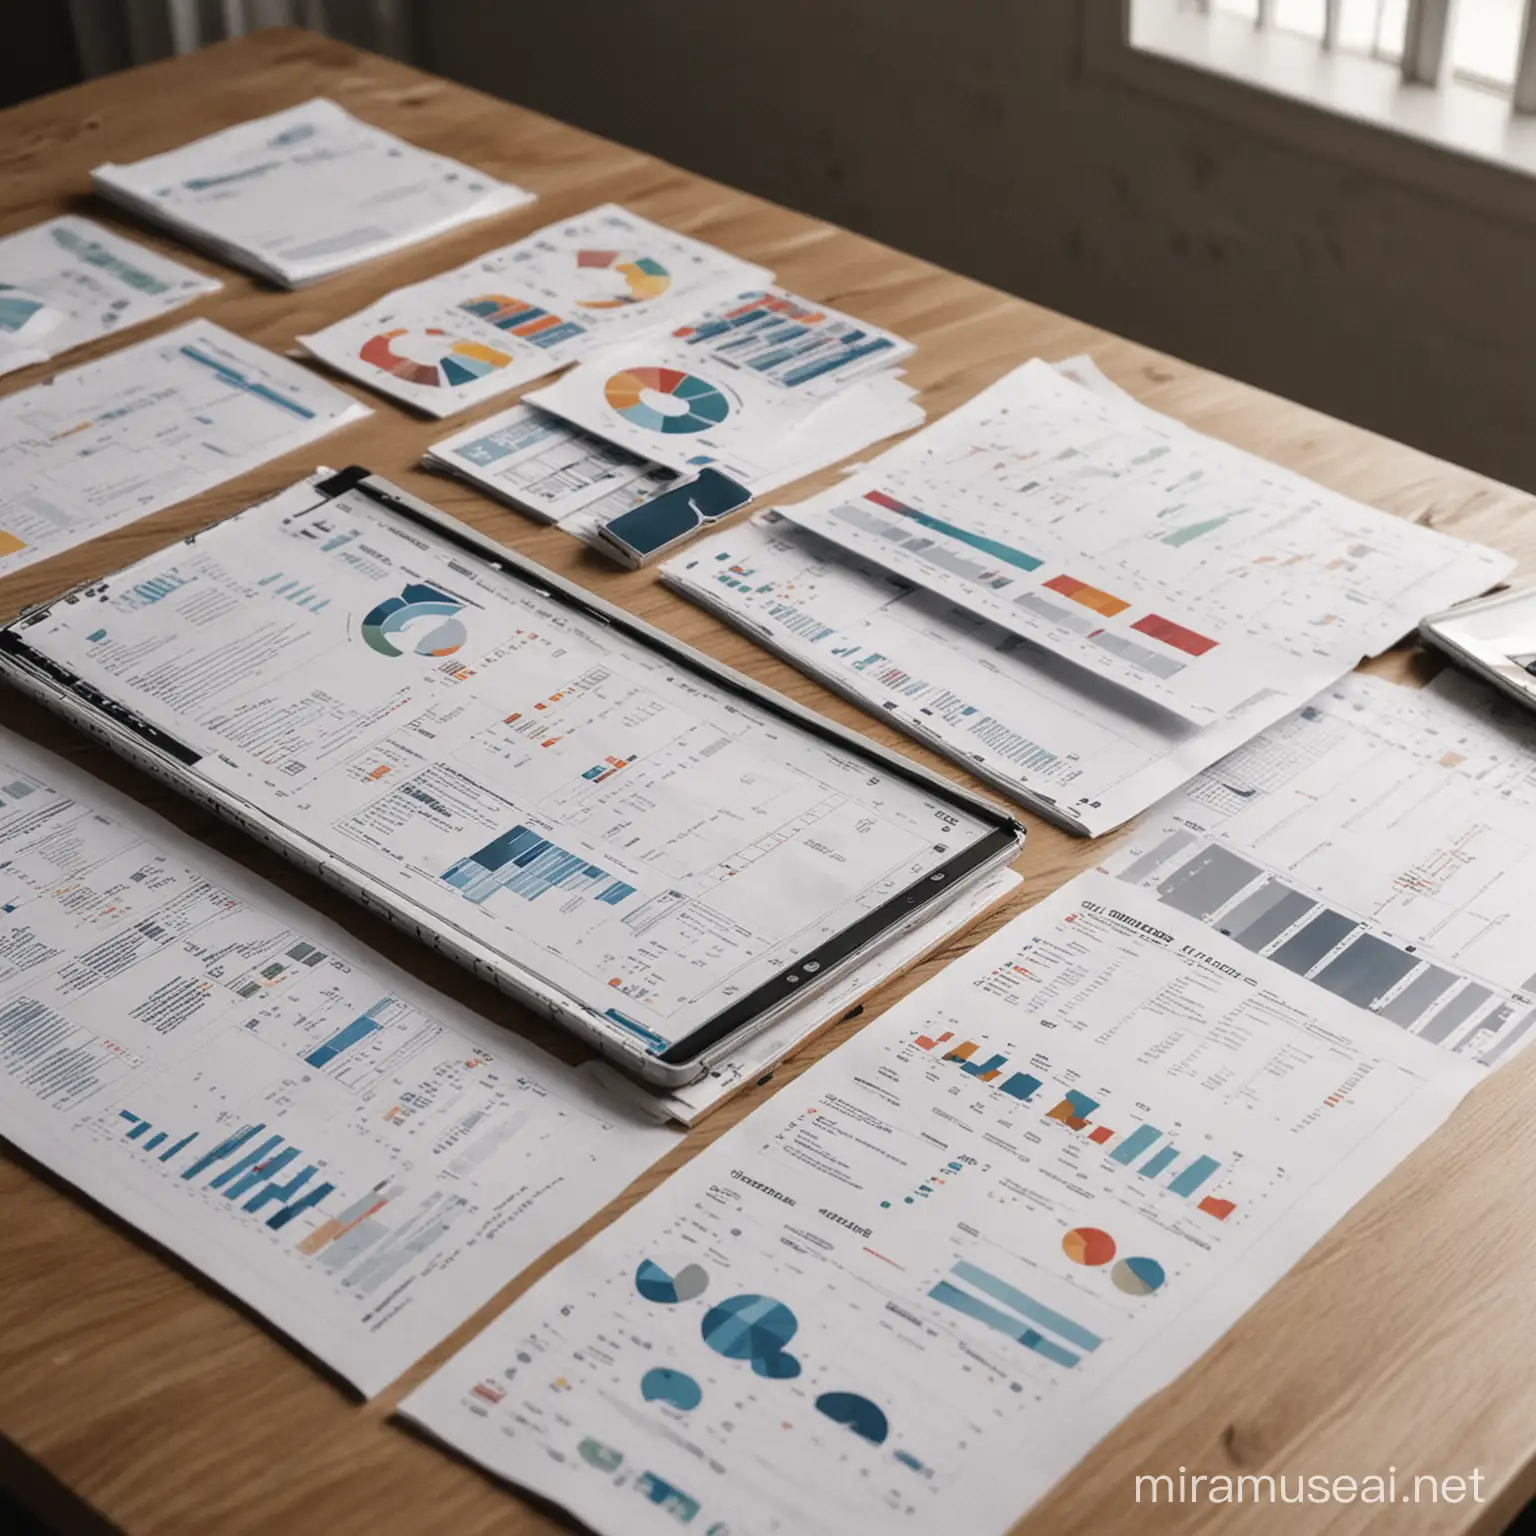 Business Management Dashboards on Table